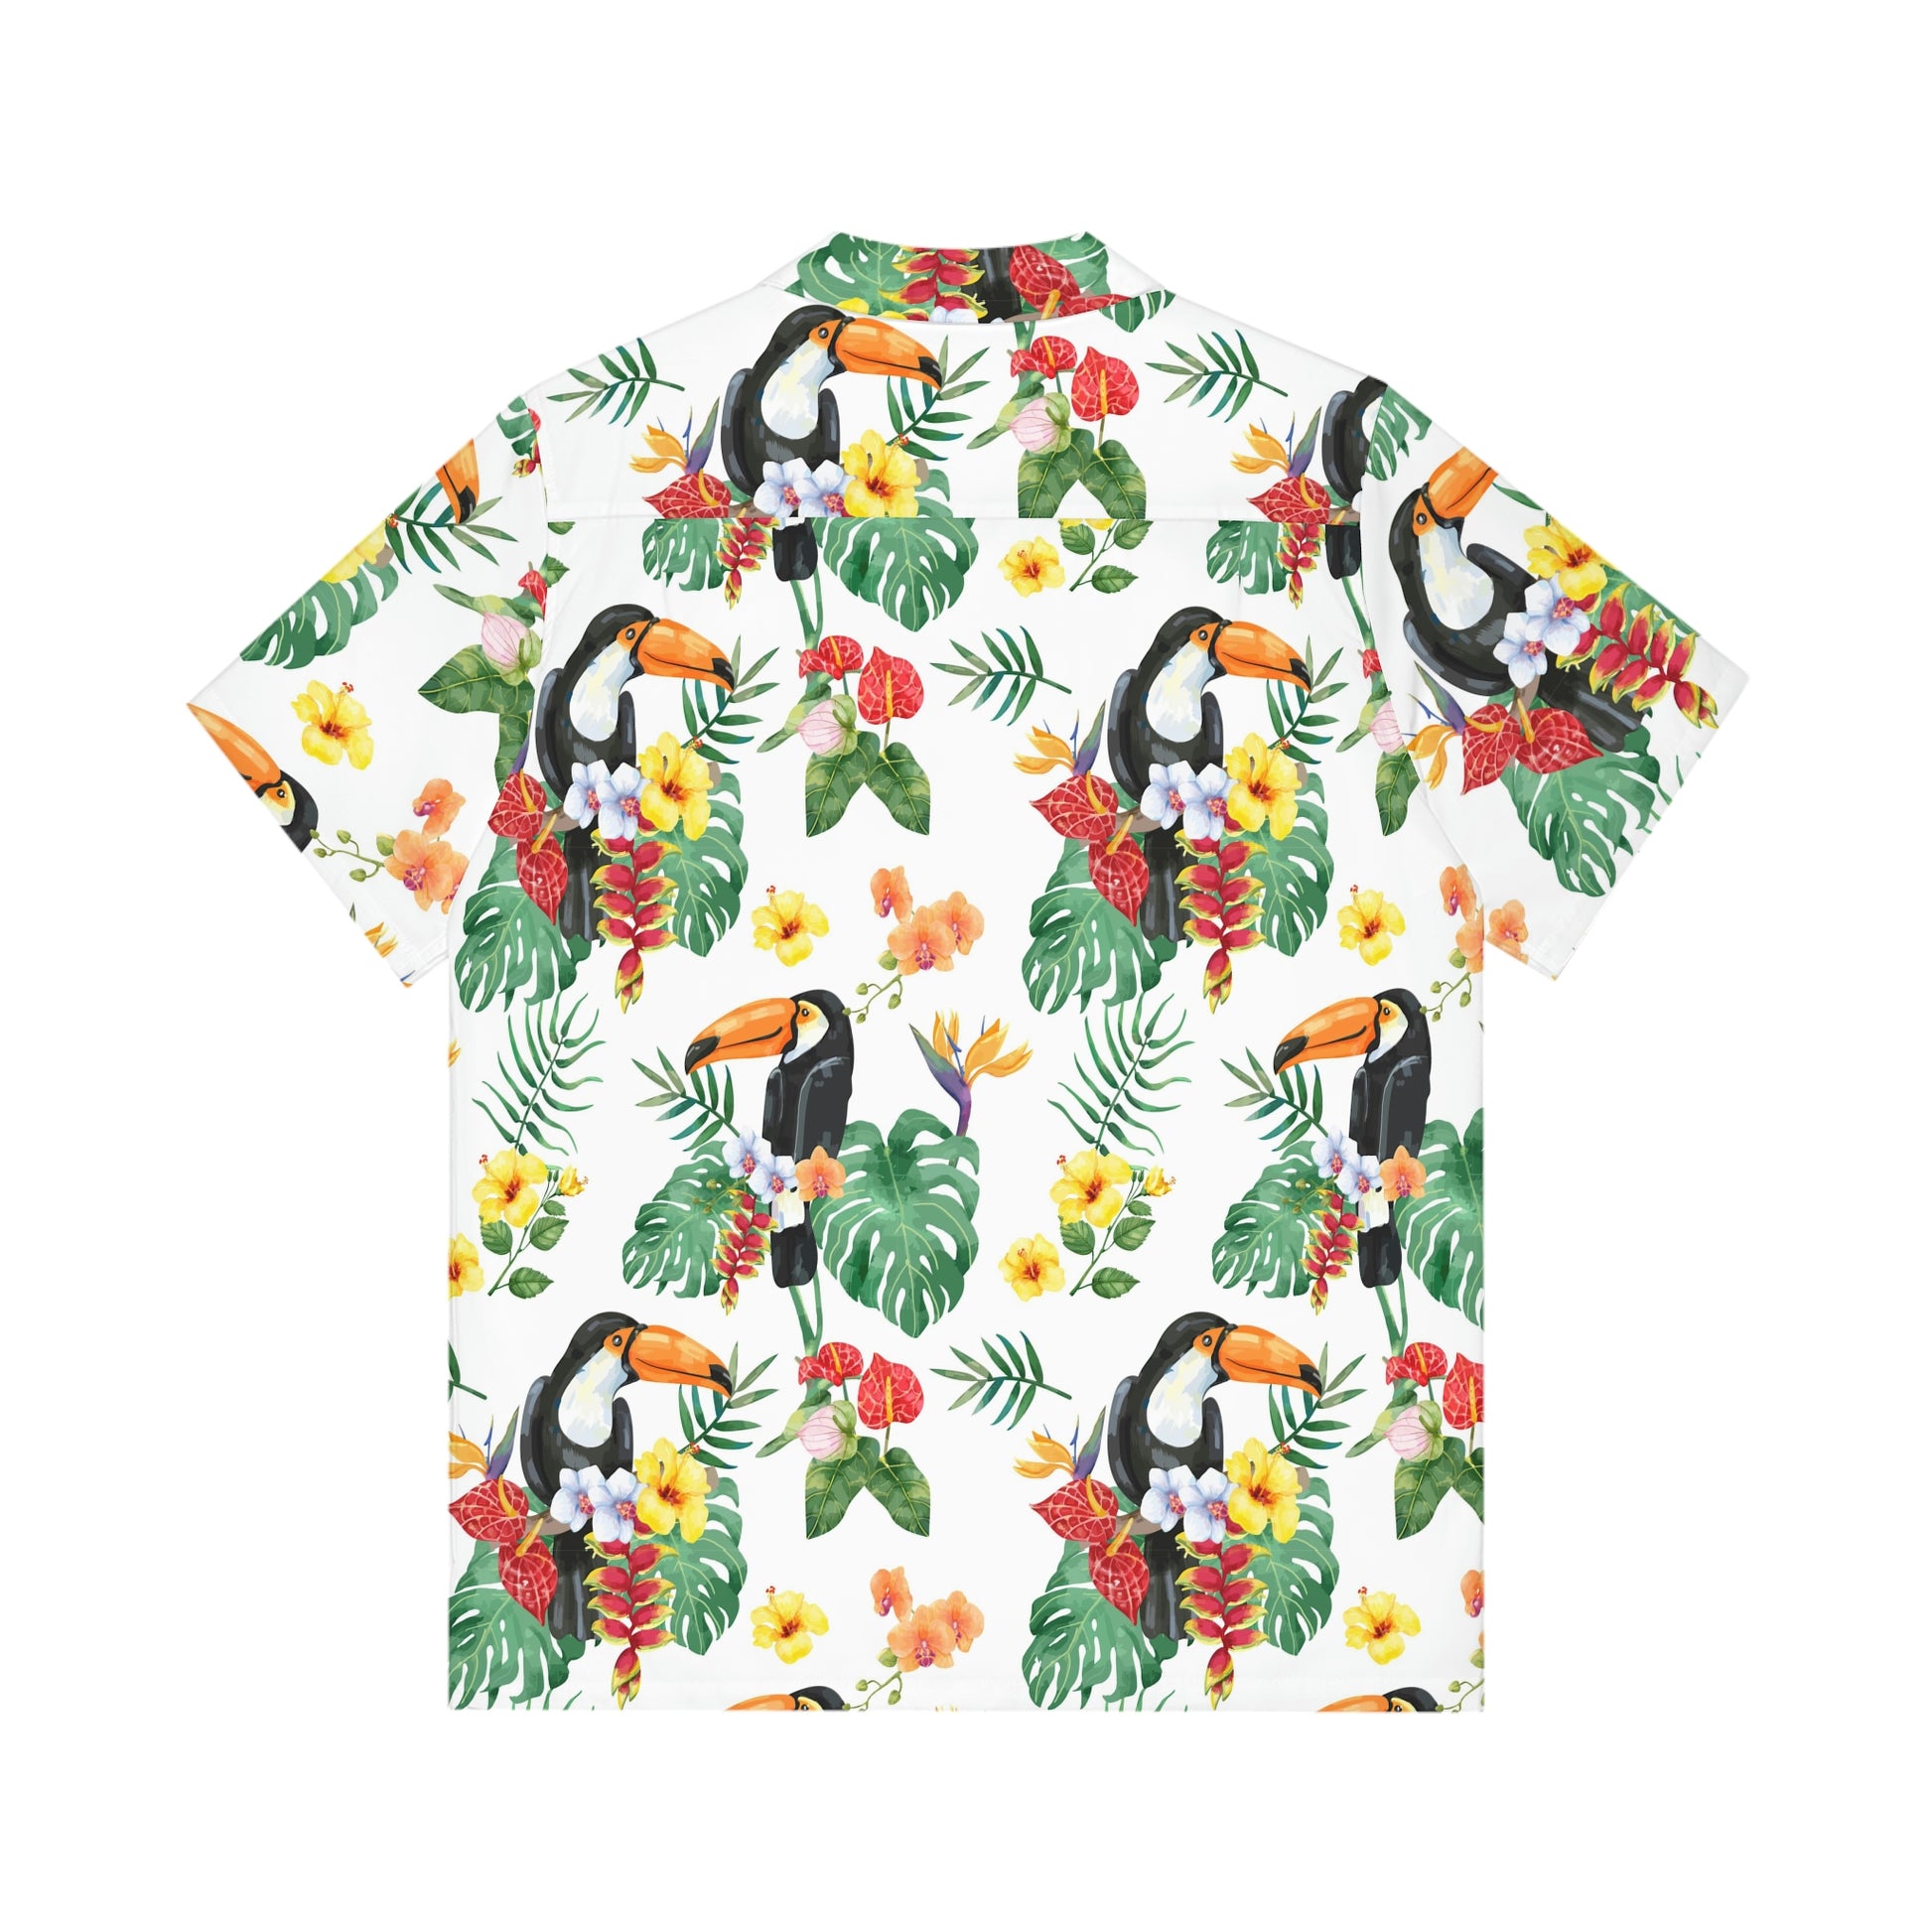 Toucans Chillin' - Carry On Crow Clothing Co.